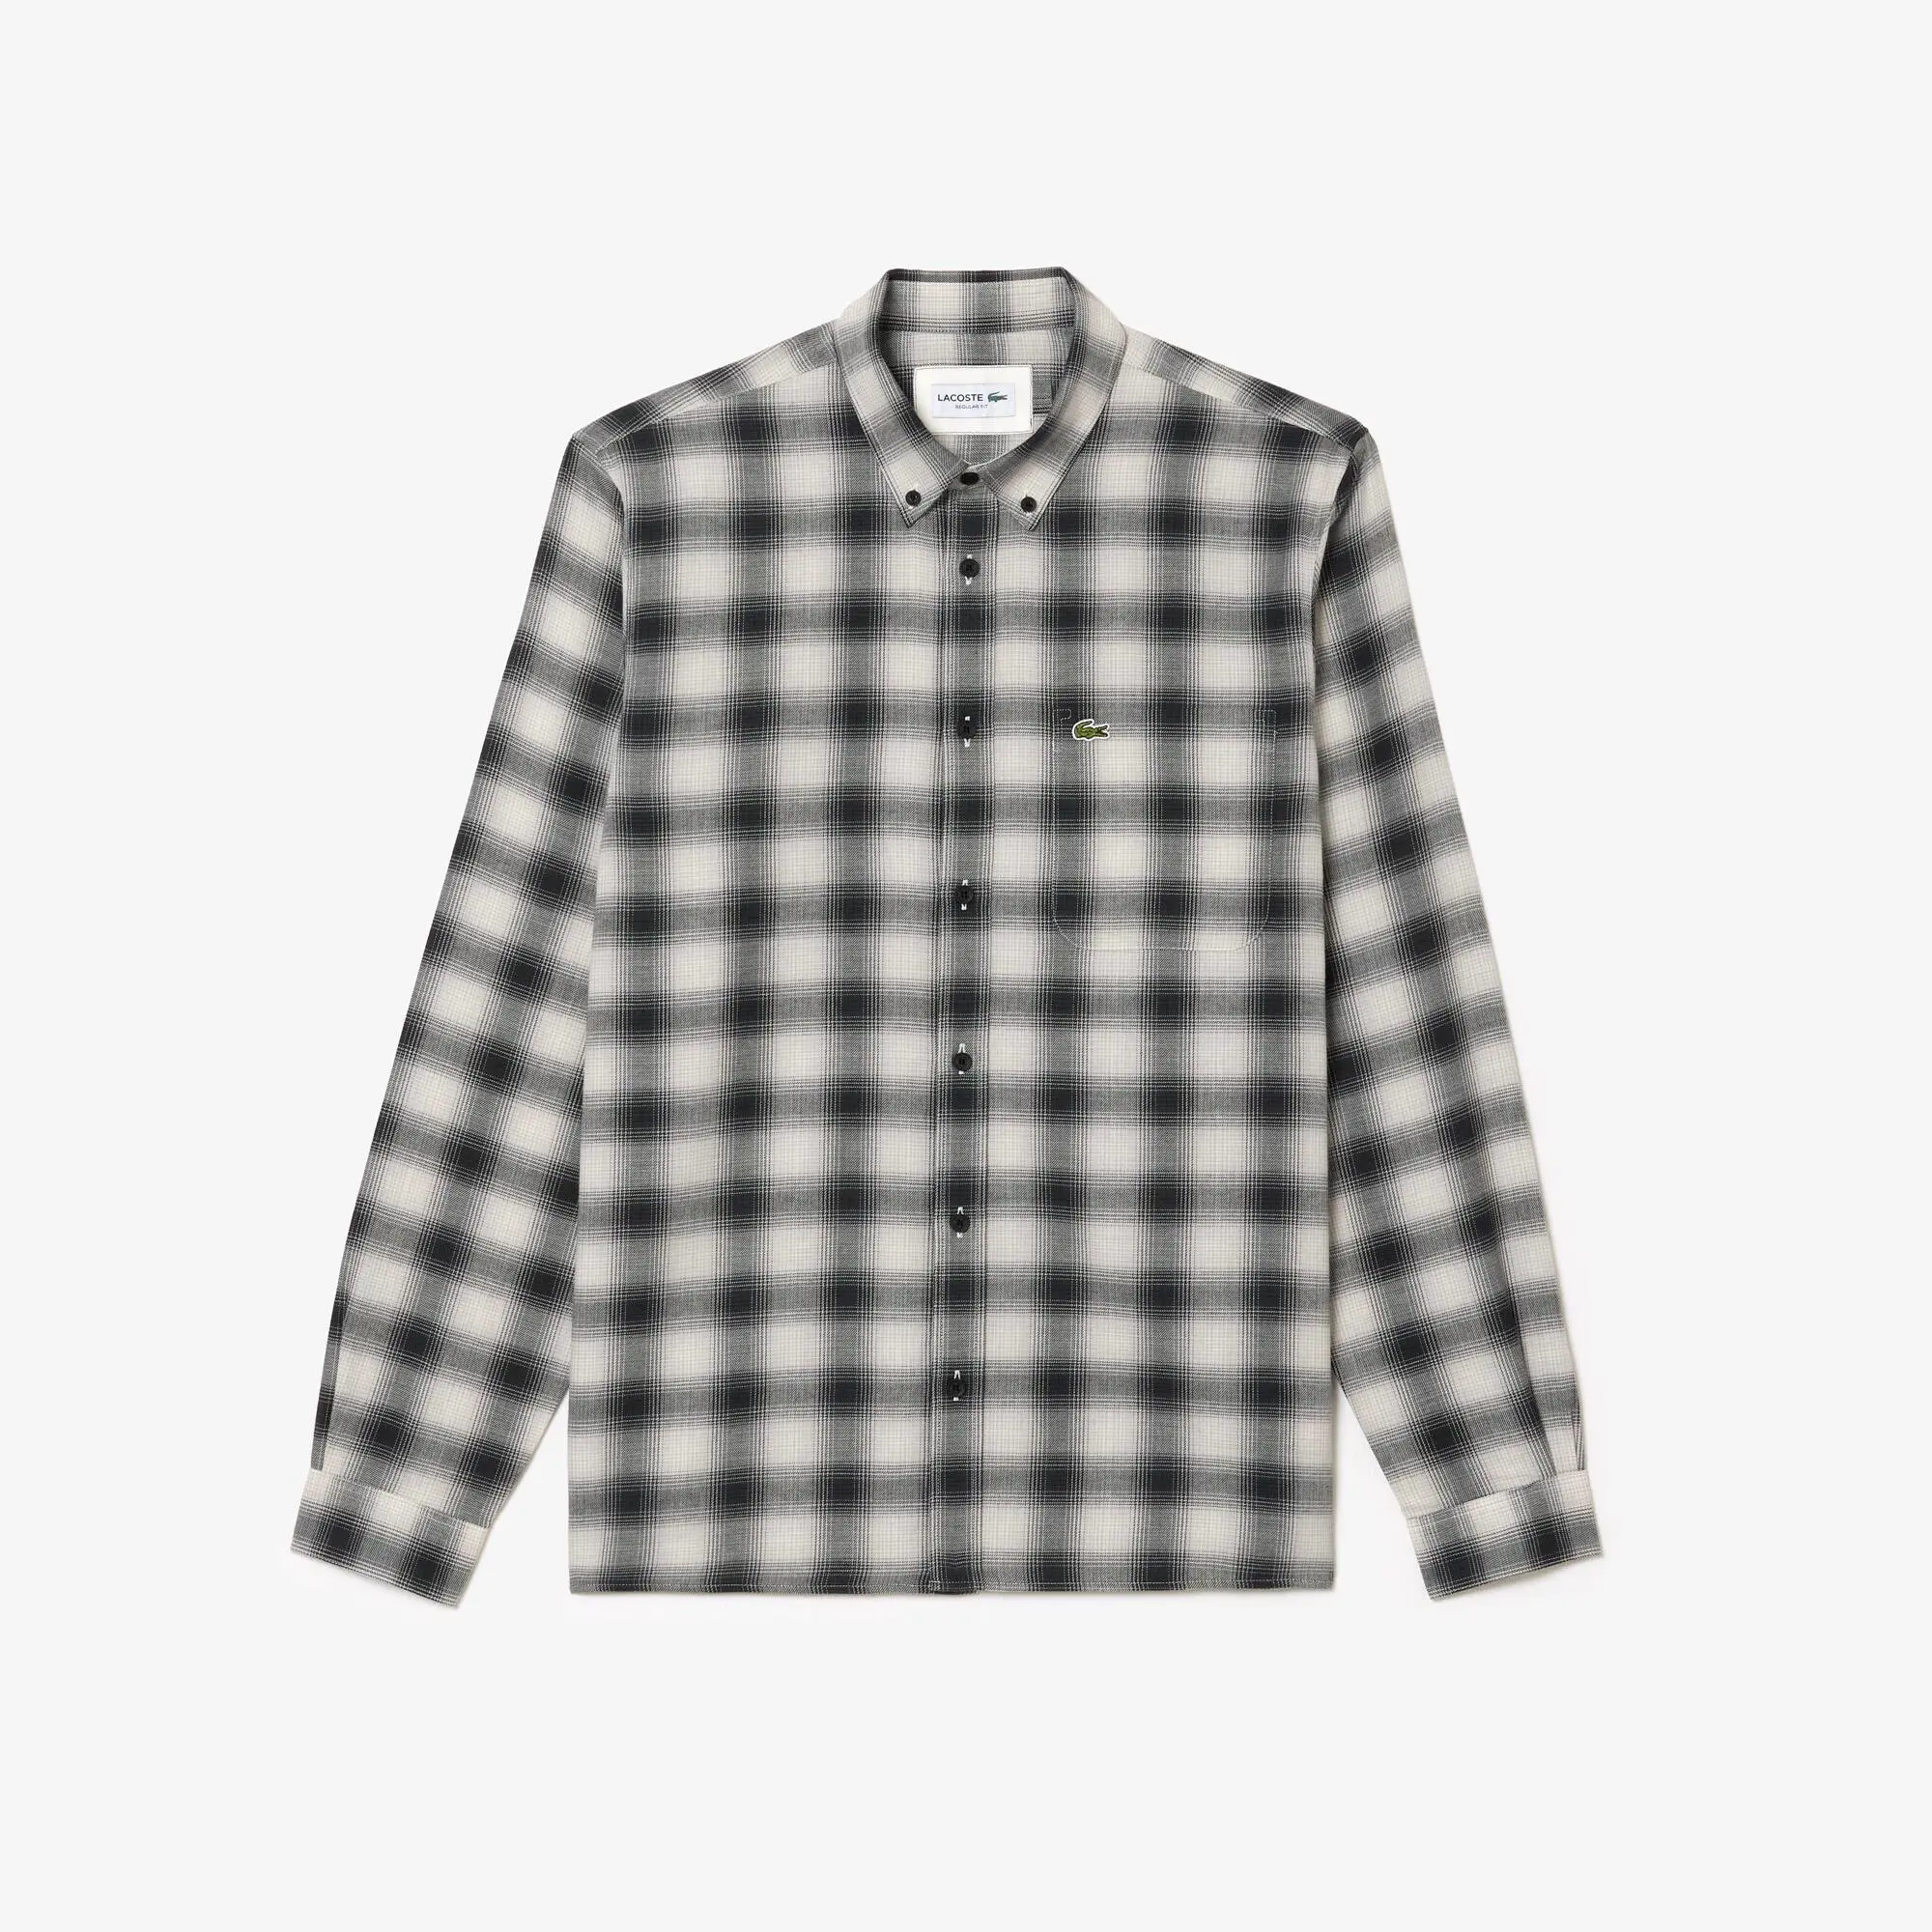 Lacoste Men's Cotton and Wool Blend Checked Flannel Shirt. 2